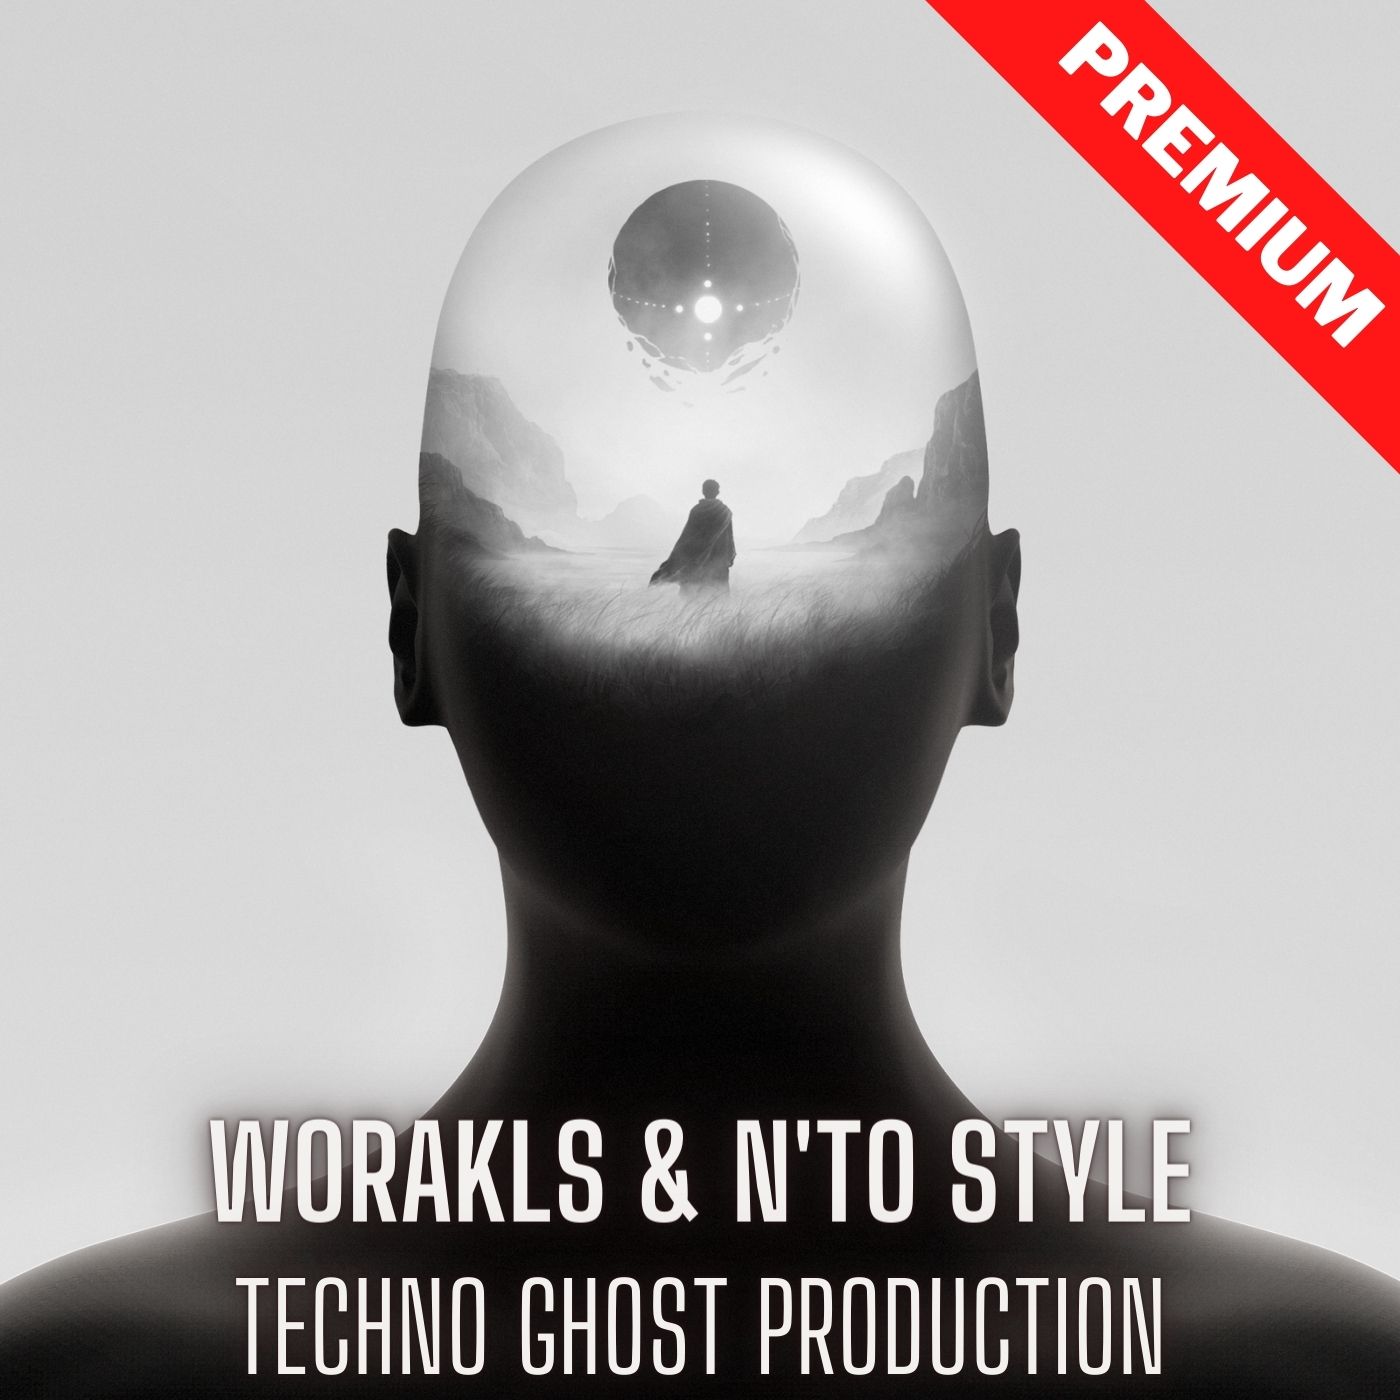 Worakls & N'to Style Melodic Techno Ghost Production